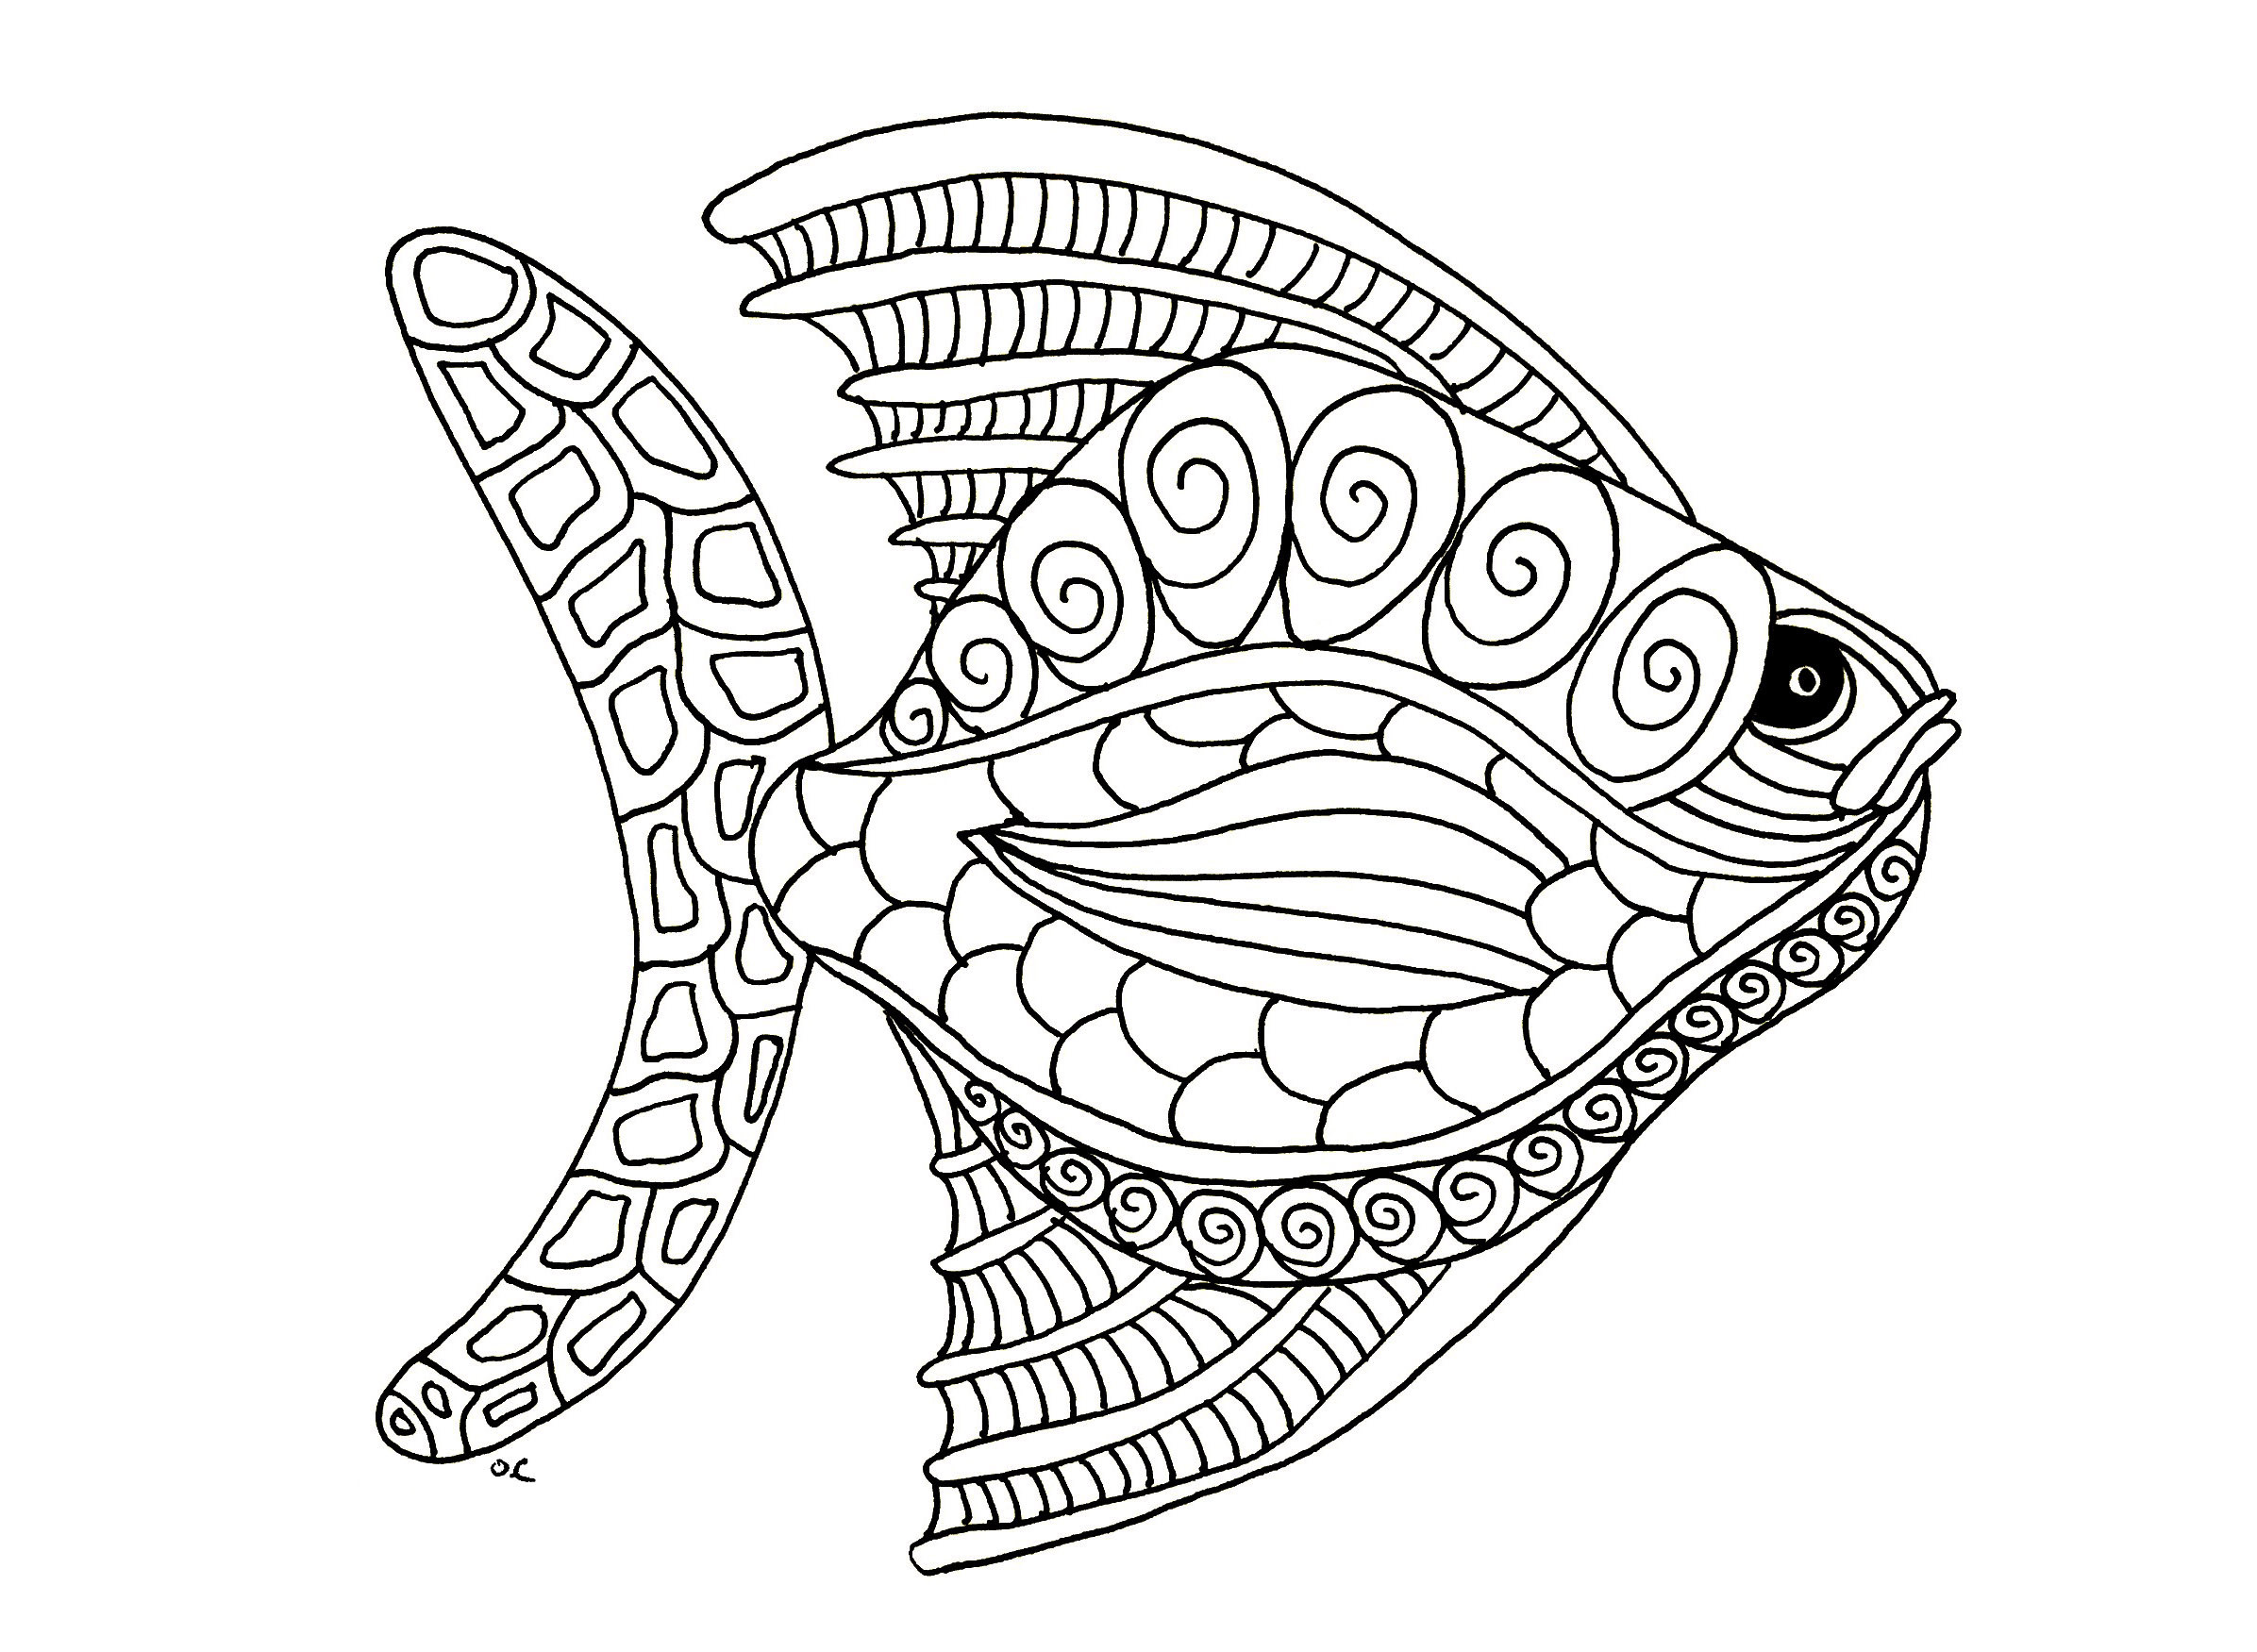 Printable Animal Coloring Pages For Kids
 Animal Coloring Pages for Adults Best Coloring Pages For